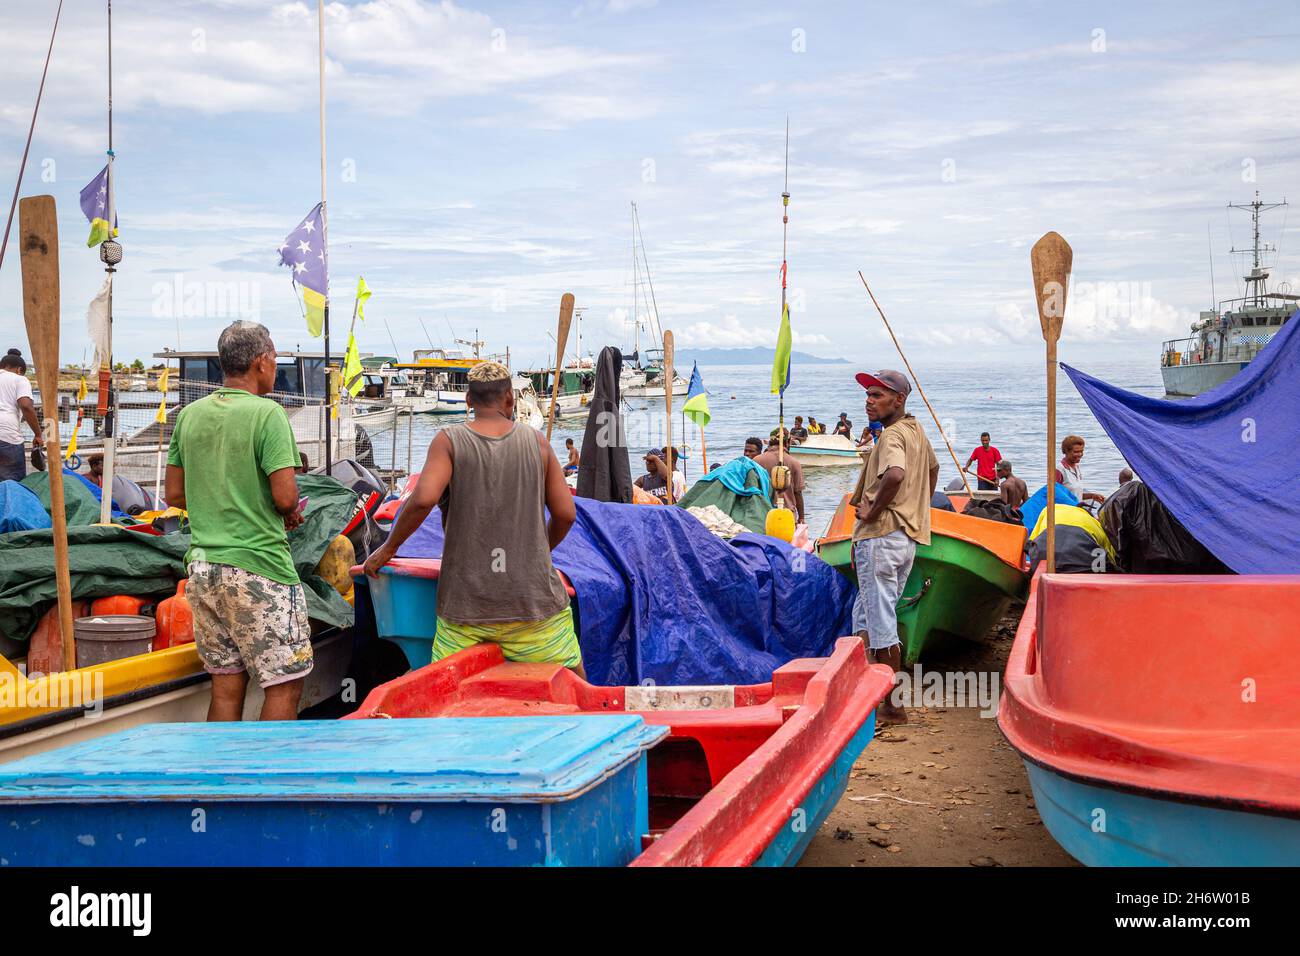 HONIARA, SOLOMON ISLANDS - Nov 10, 2016: People milling amongst boats lined up on the shoreline at Point Cruz Yatch Club in Honiara, the capital city Stock Photo